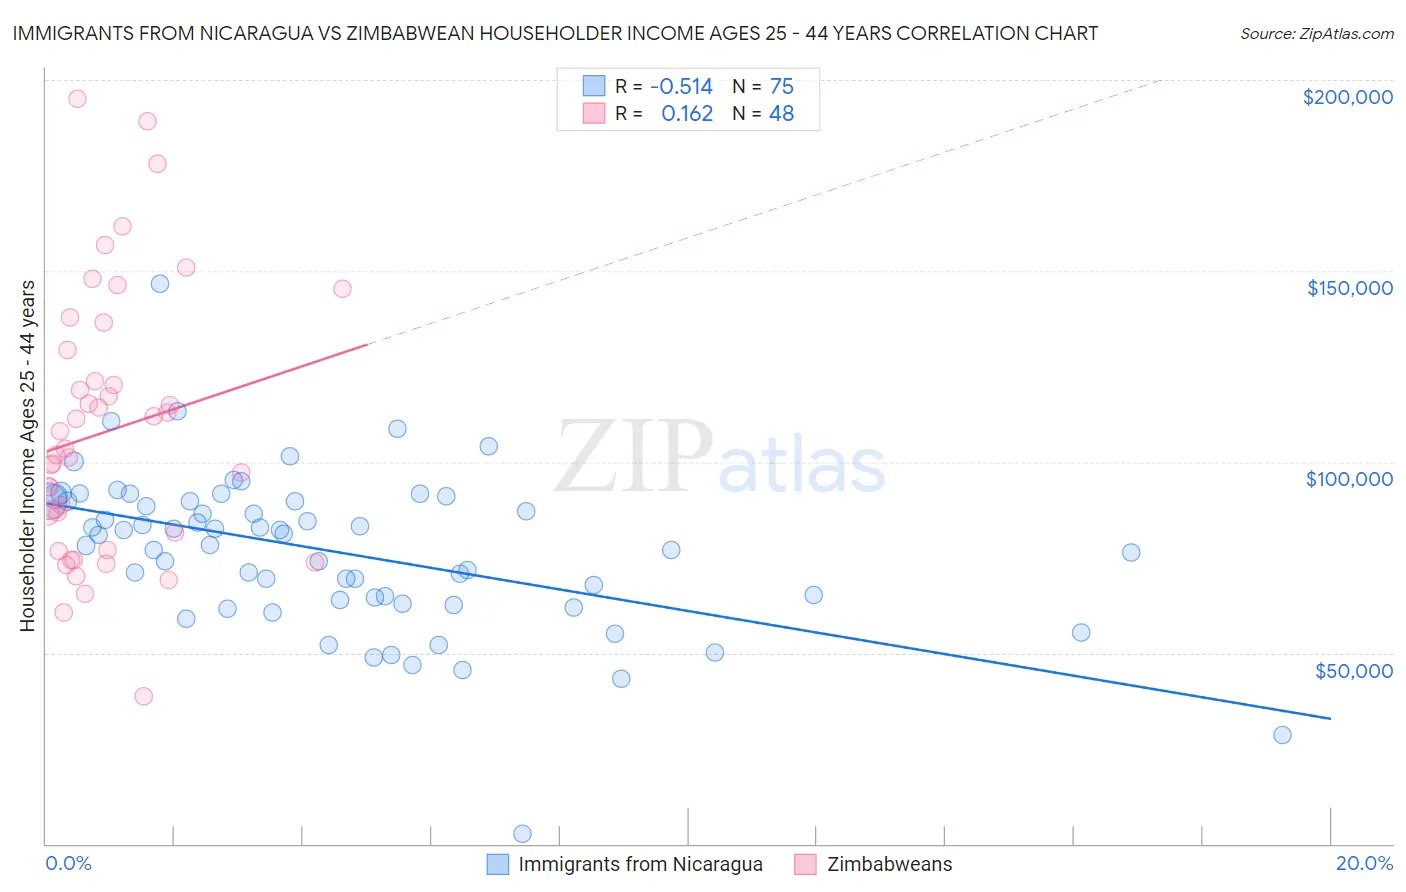 Immigrants from Nicaragua vs Zimbabwean Householder Income Ages 25 - 44 years